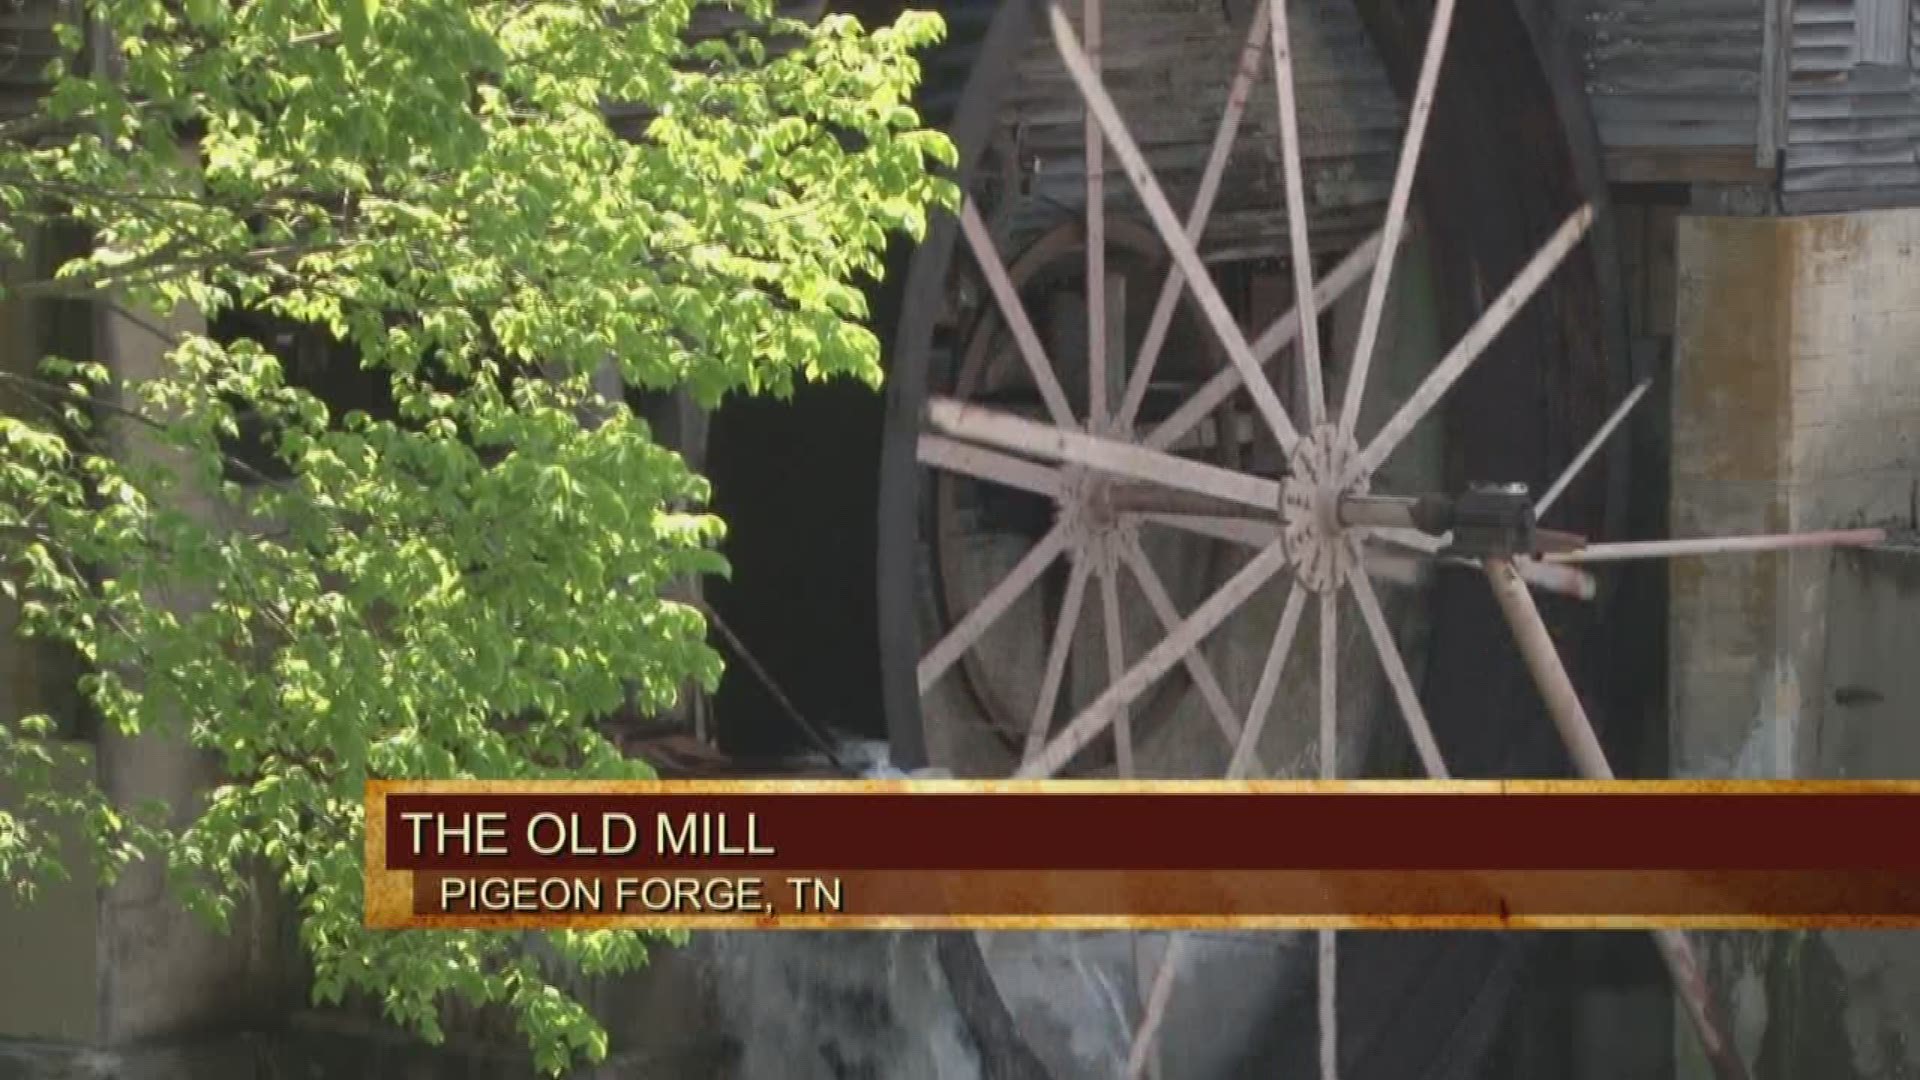 The Old Mill has been attracting visitors for years and soon they'll be celebrating a big milestone. (5/5/17 4PM)